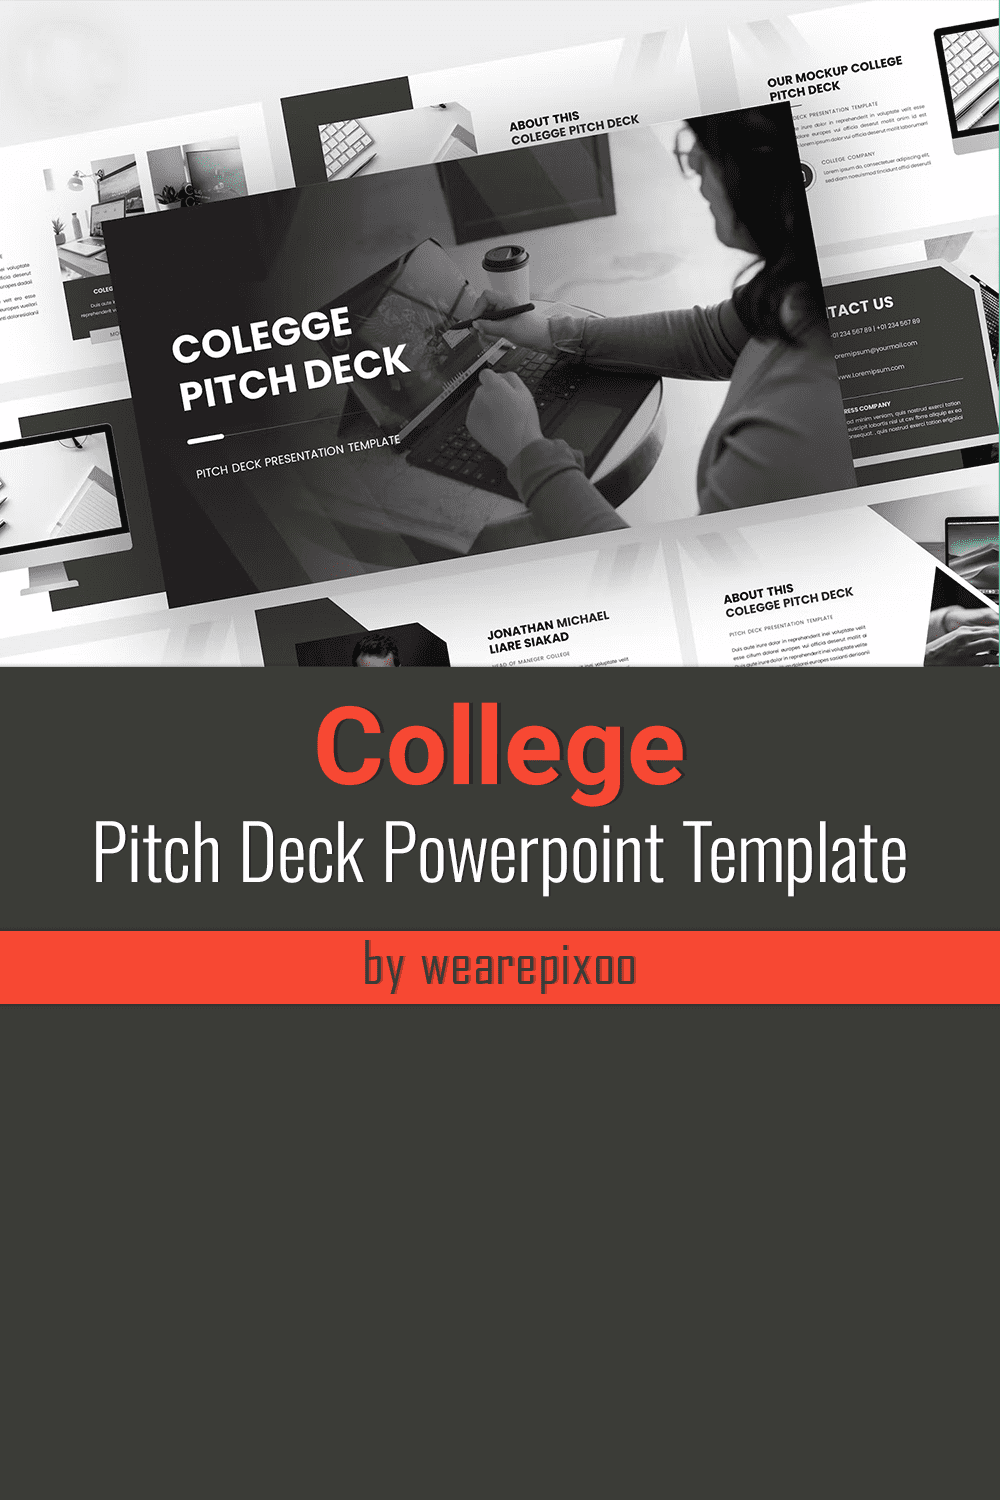 College Pitch Deck Powerpoint Template - pinterest image preview.